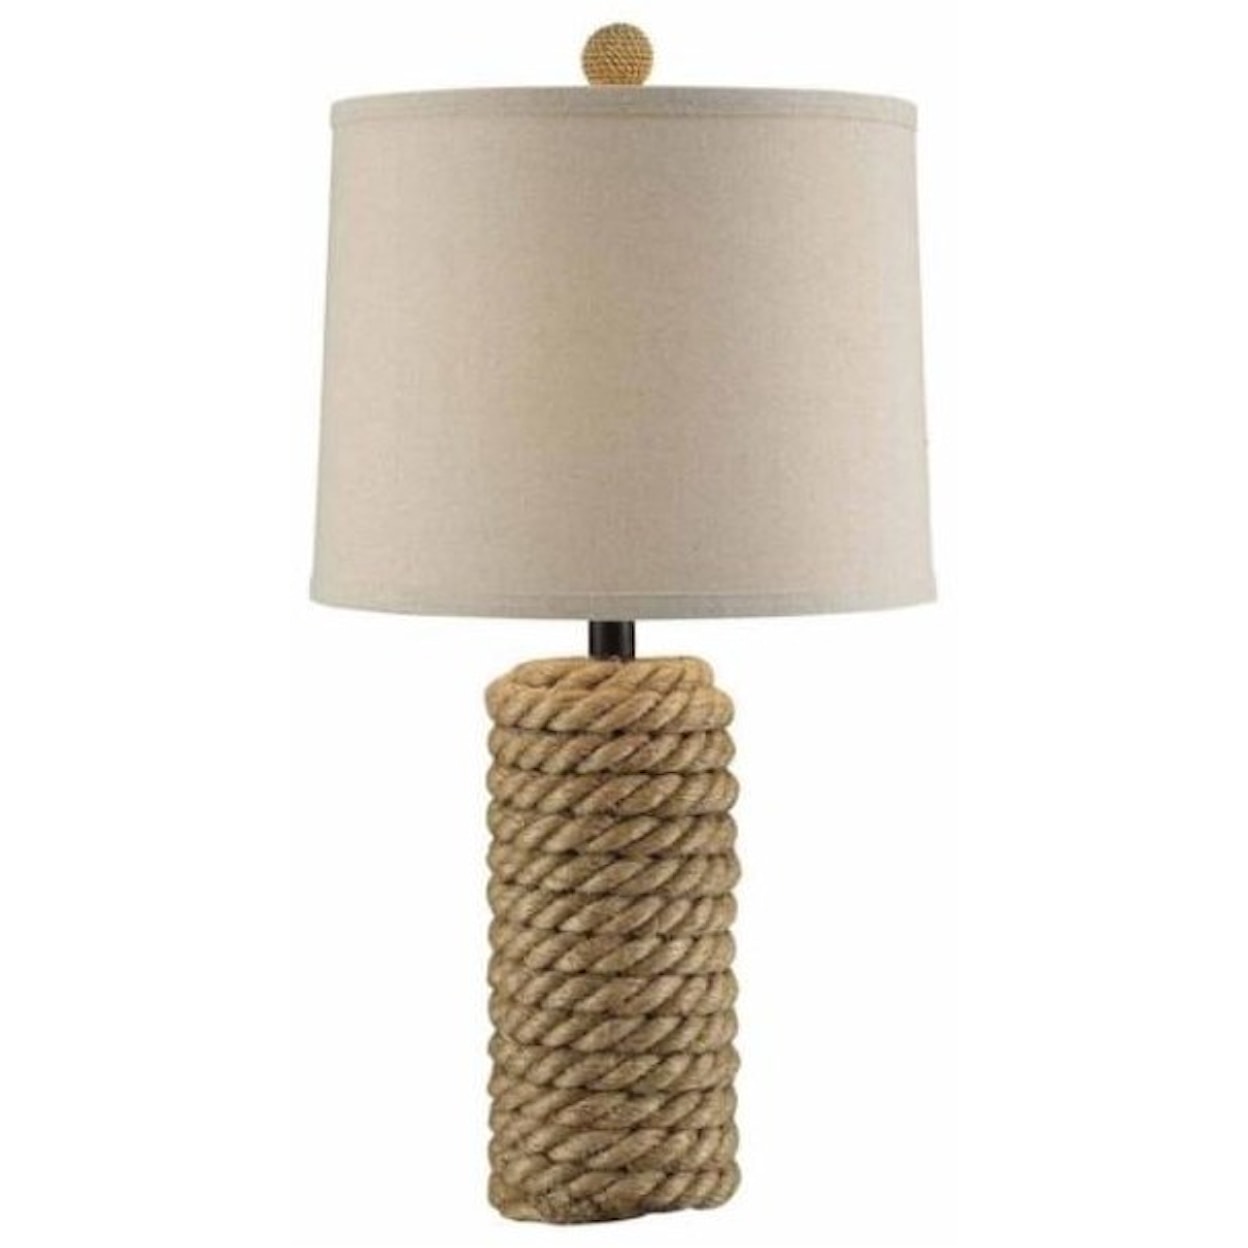 Crestview Collection Lighting Coastal Table Lamp